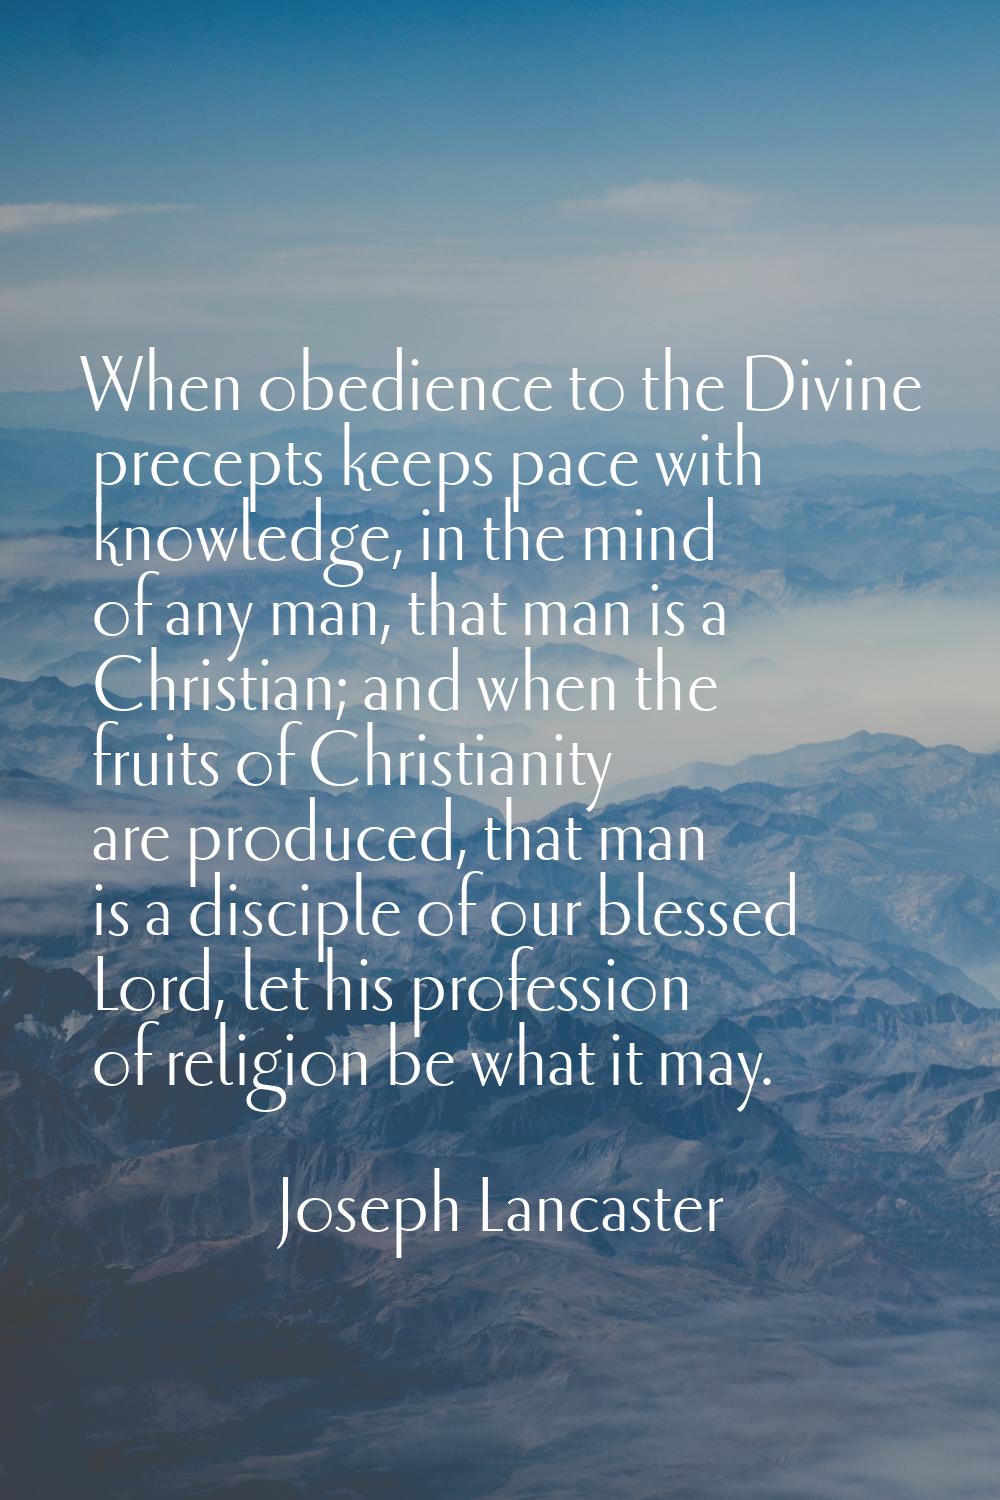 When obedience to the Divine precepts keeps pace with knowledge, in the mind of any man, that man i